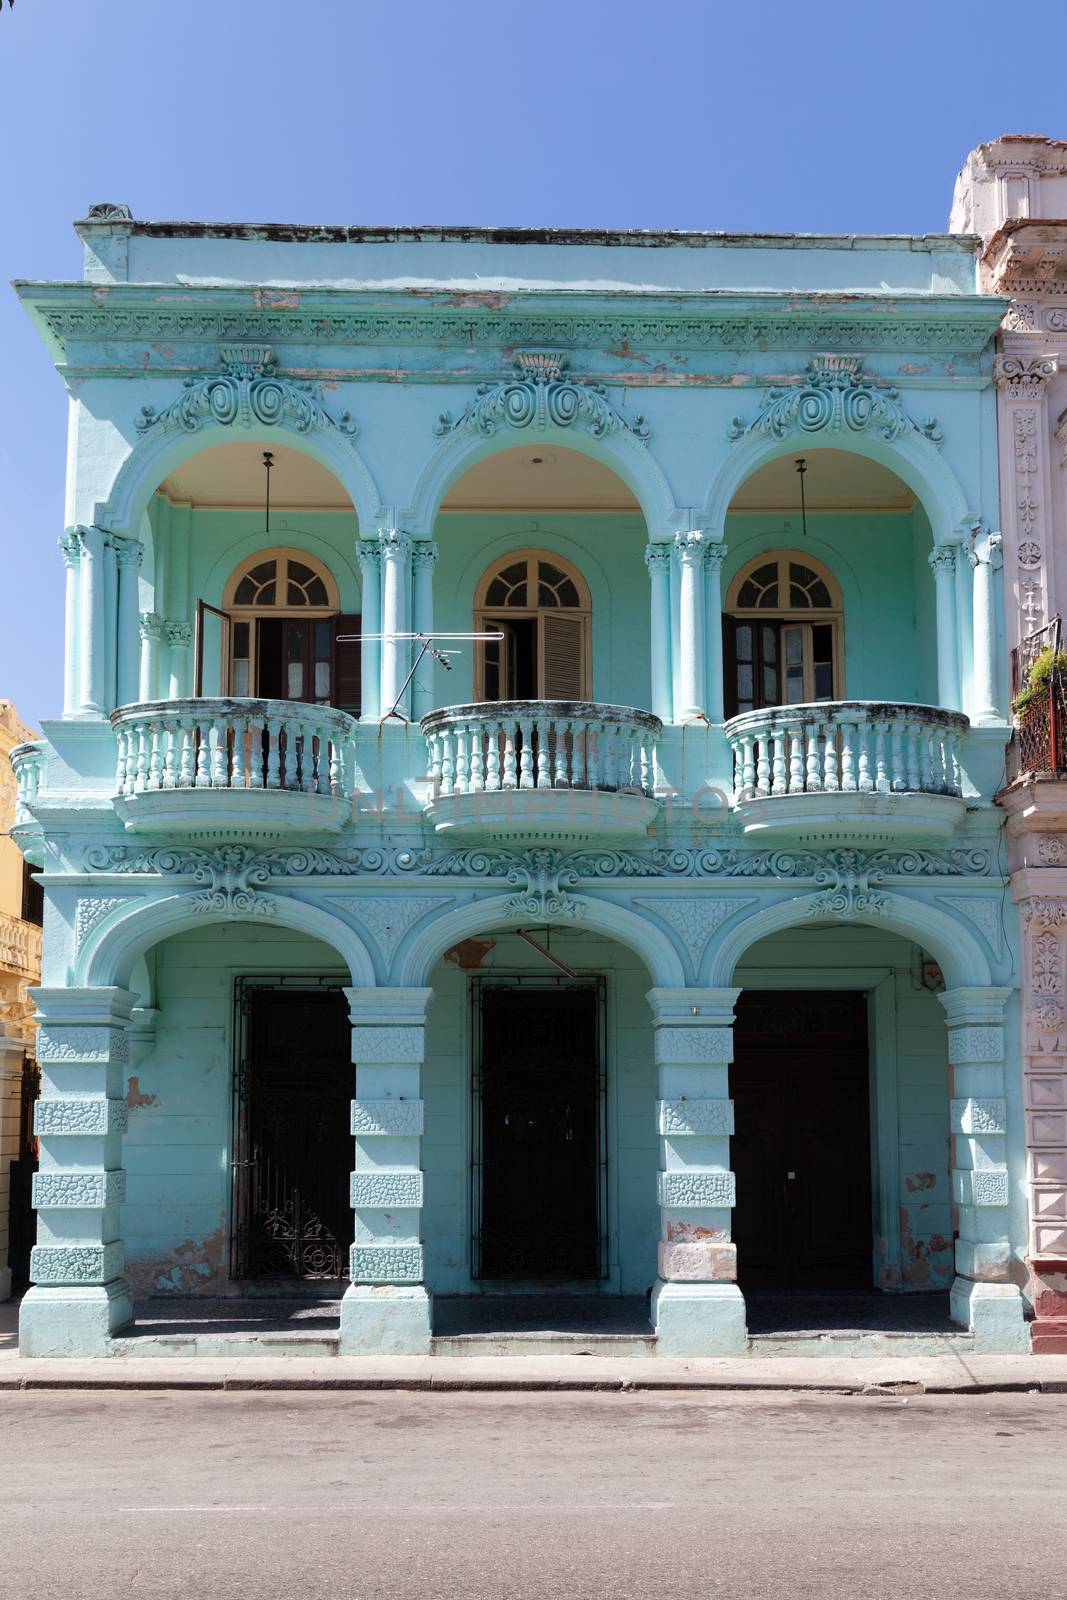 Havana, Cuba - 8 February 2015: Example of colonial architecture at Passeo Marti with balconies and arches